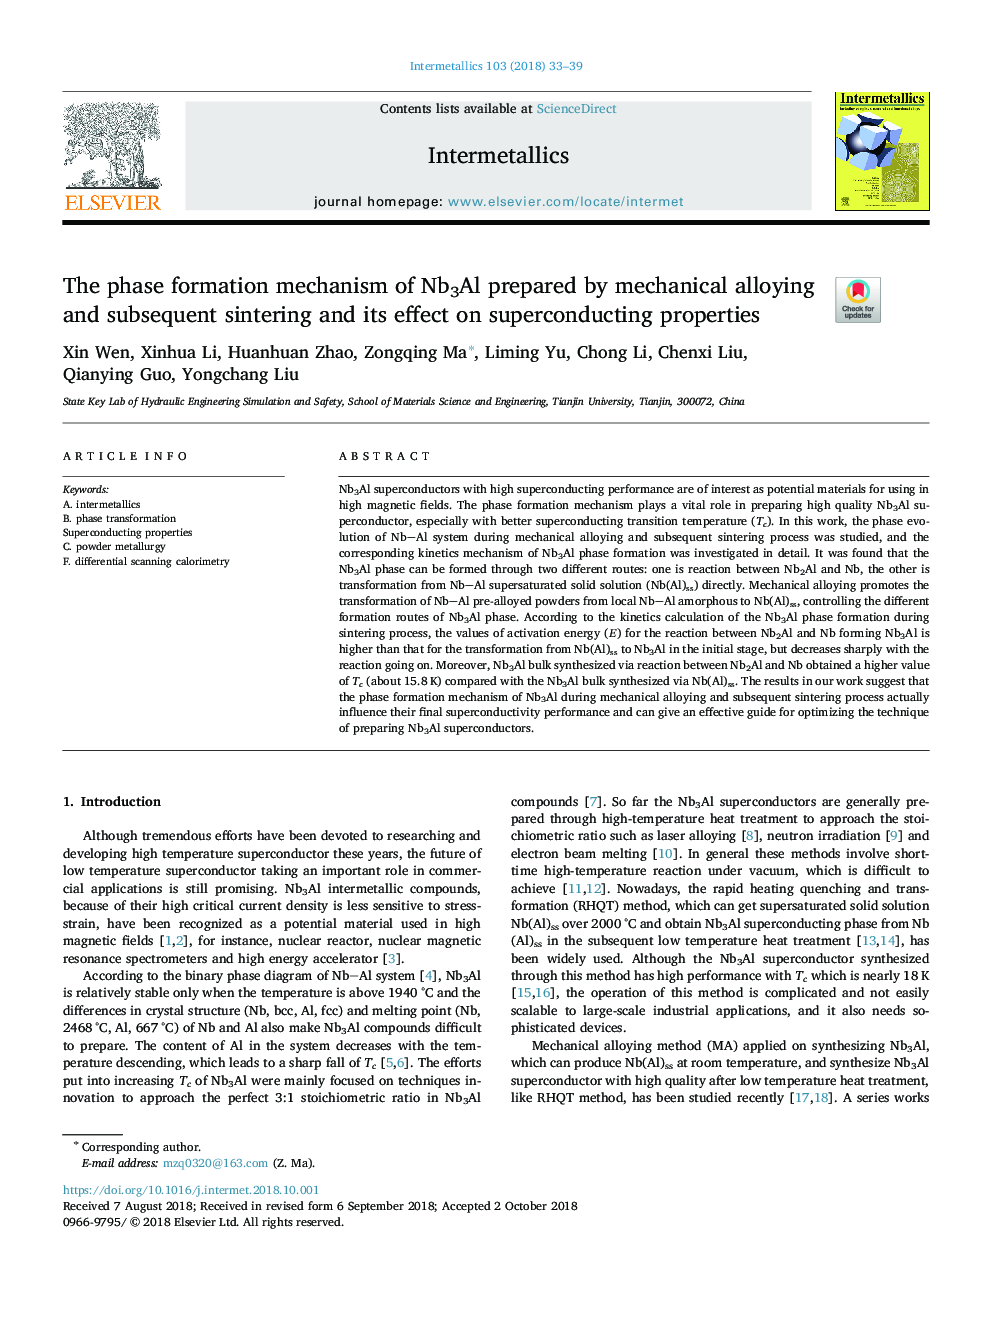 The phase formation mechanism of Nb3Al prepared by mechanical alloying and subsequent sintering and its effect on superconducting properties